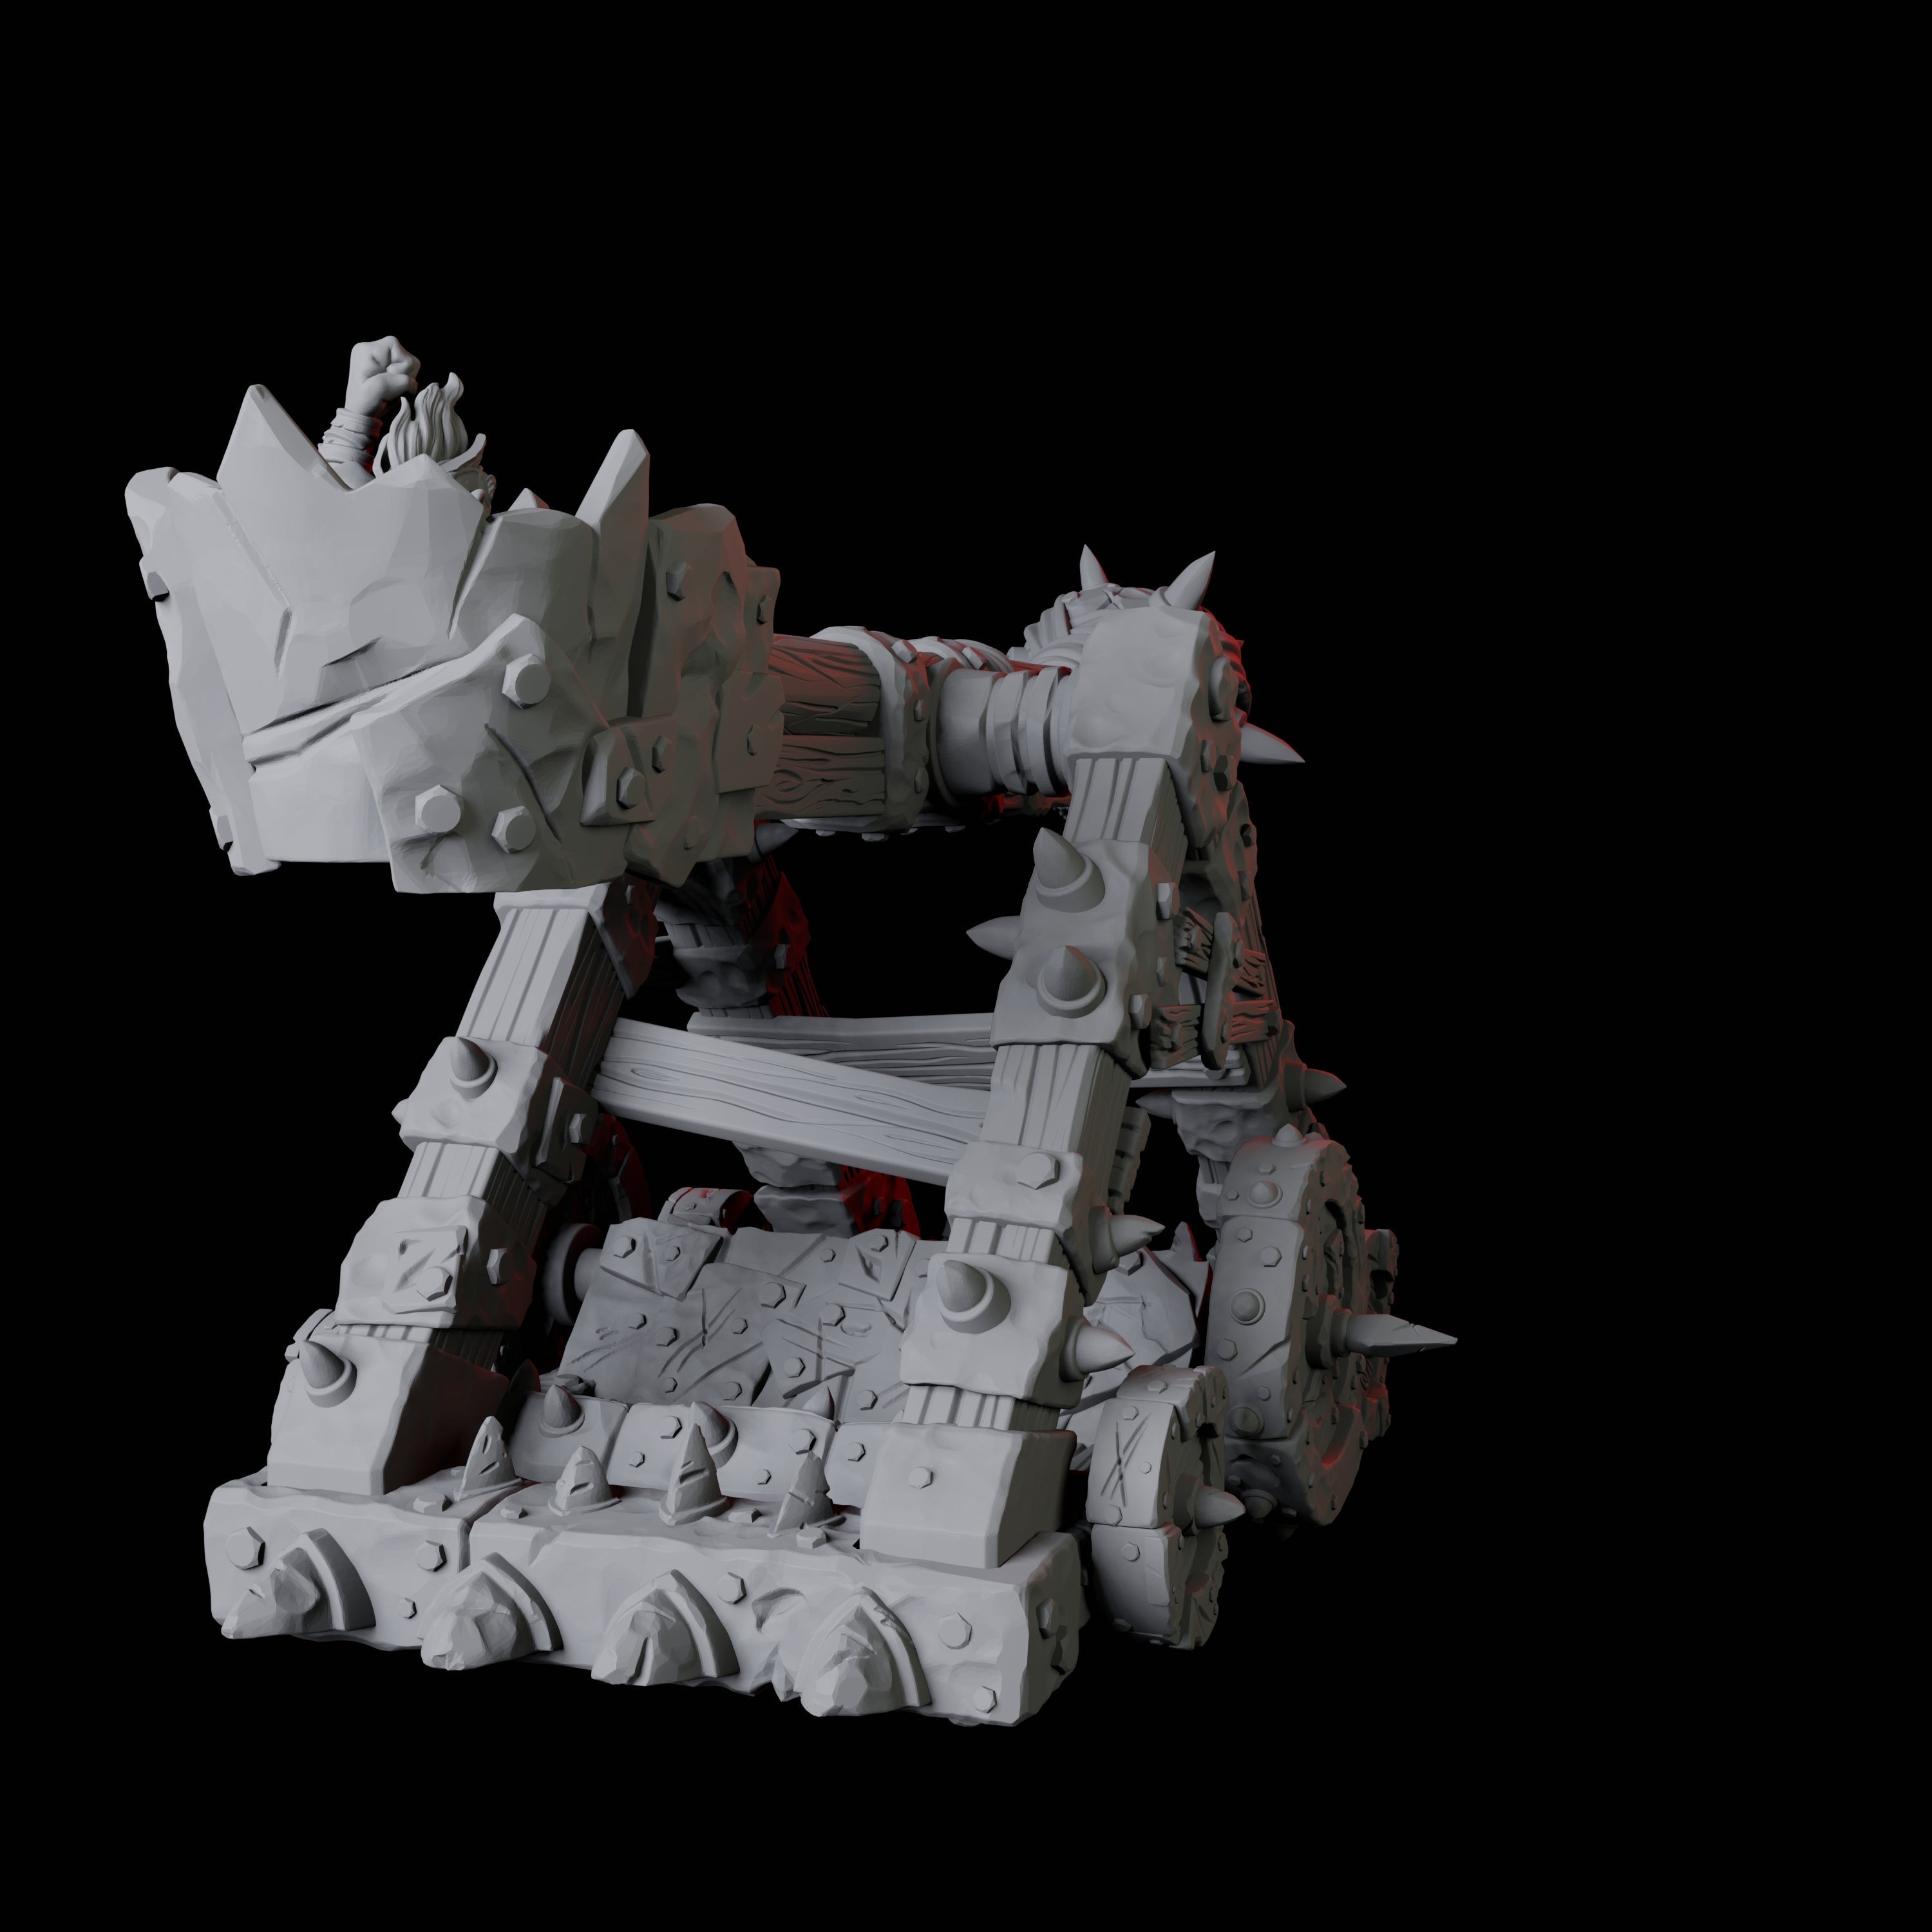 Goblin Catapult Miniature for Dungeons and Dragons